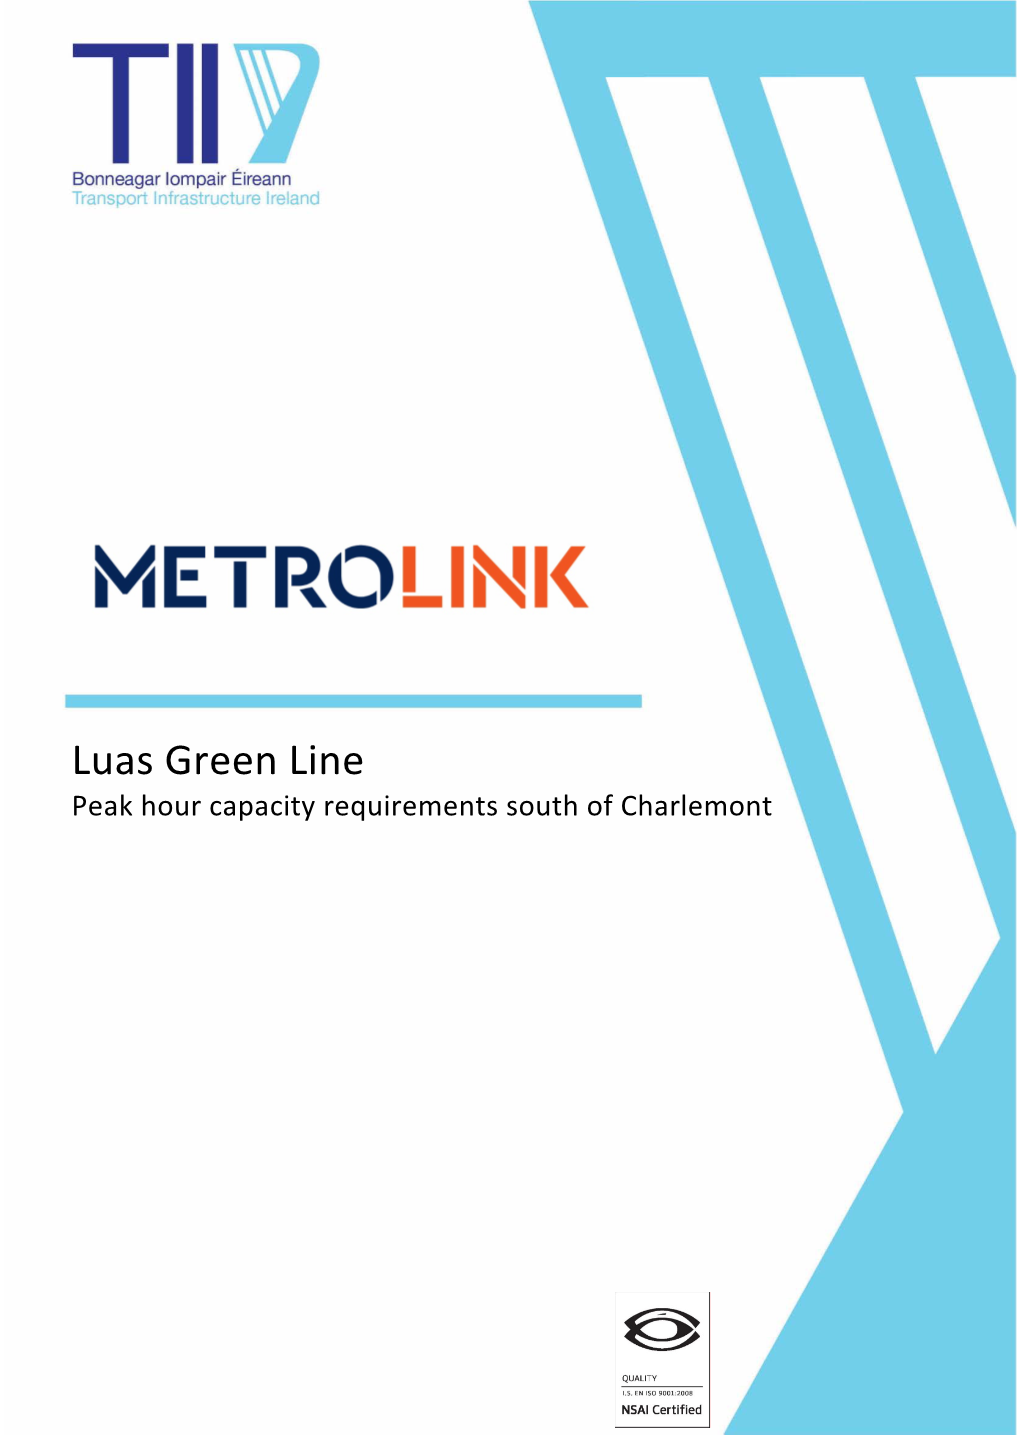 Luas Green Line Peak Hour Capacity Requirements South of Charlemont